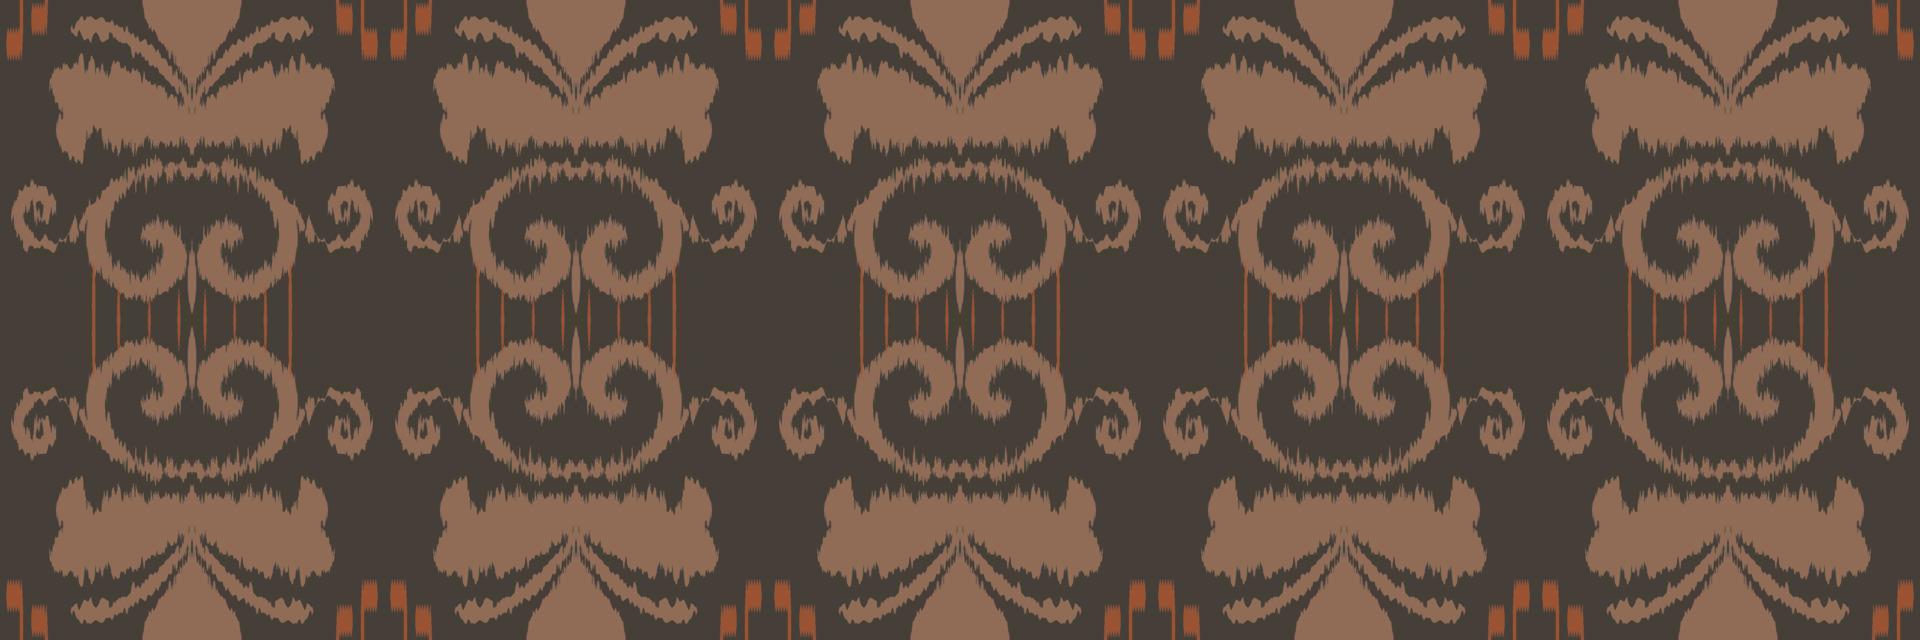 Ikat print tribal backgrounds Geometric Traditional ethnic oriental design for the background. Folk embroidery, Indian, Scandinavian, Gypsy, Mexican, African rug, wallpaper. vector